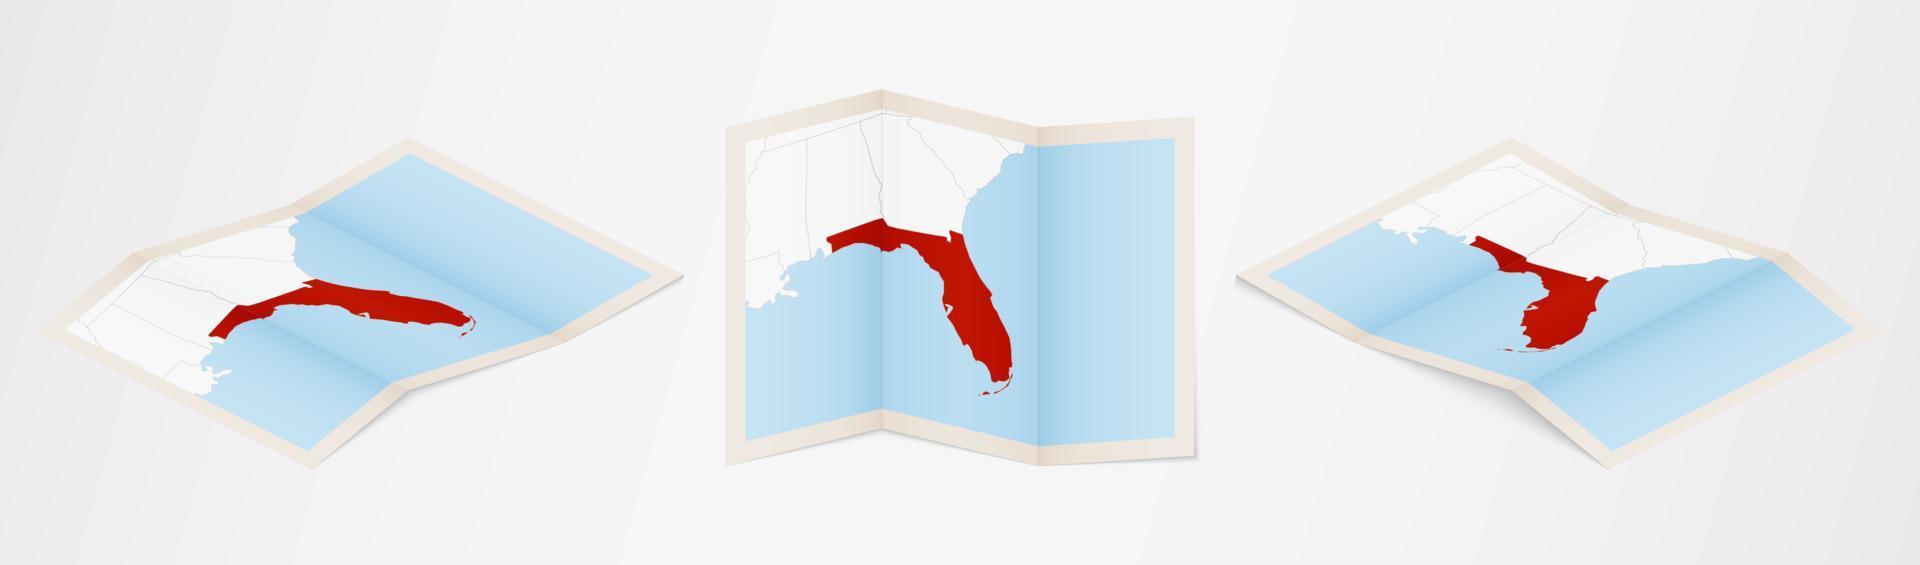 Folded map of Florida in three different versions. vector